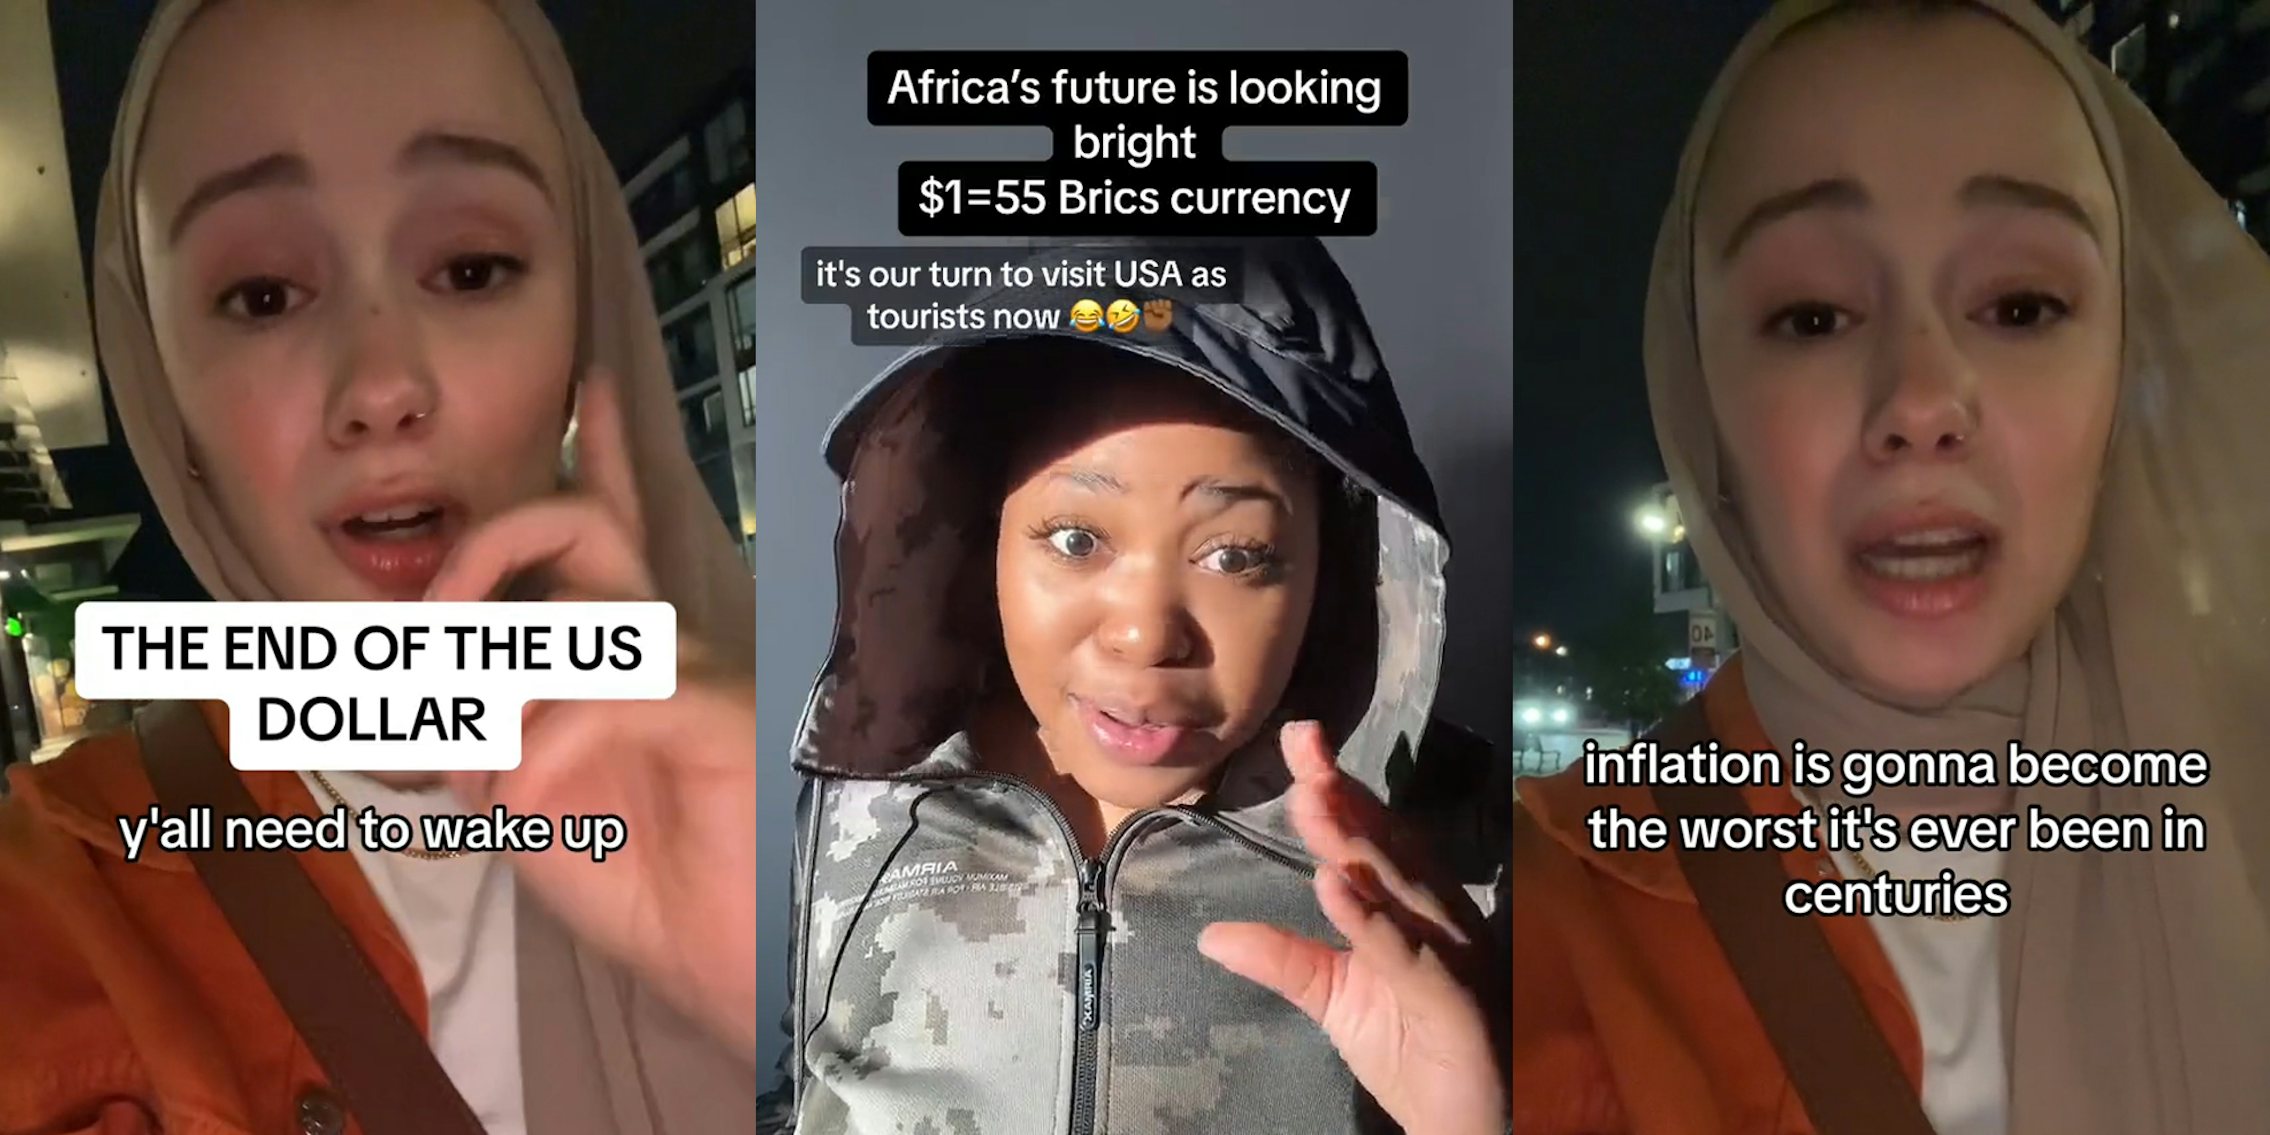 man speaking with caption 'THE END OS THE US DOLLAR y'all need to wake up' (l) woman speaking with caption 'Africa's future is looking bright $1=55 Brics currency it's our turn to visit USA as tourists now' (c) woman speaking with caption 'inflation is gonna become the worst it's ever been in centuries' (r)